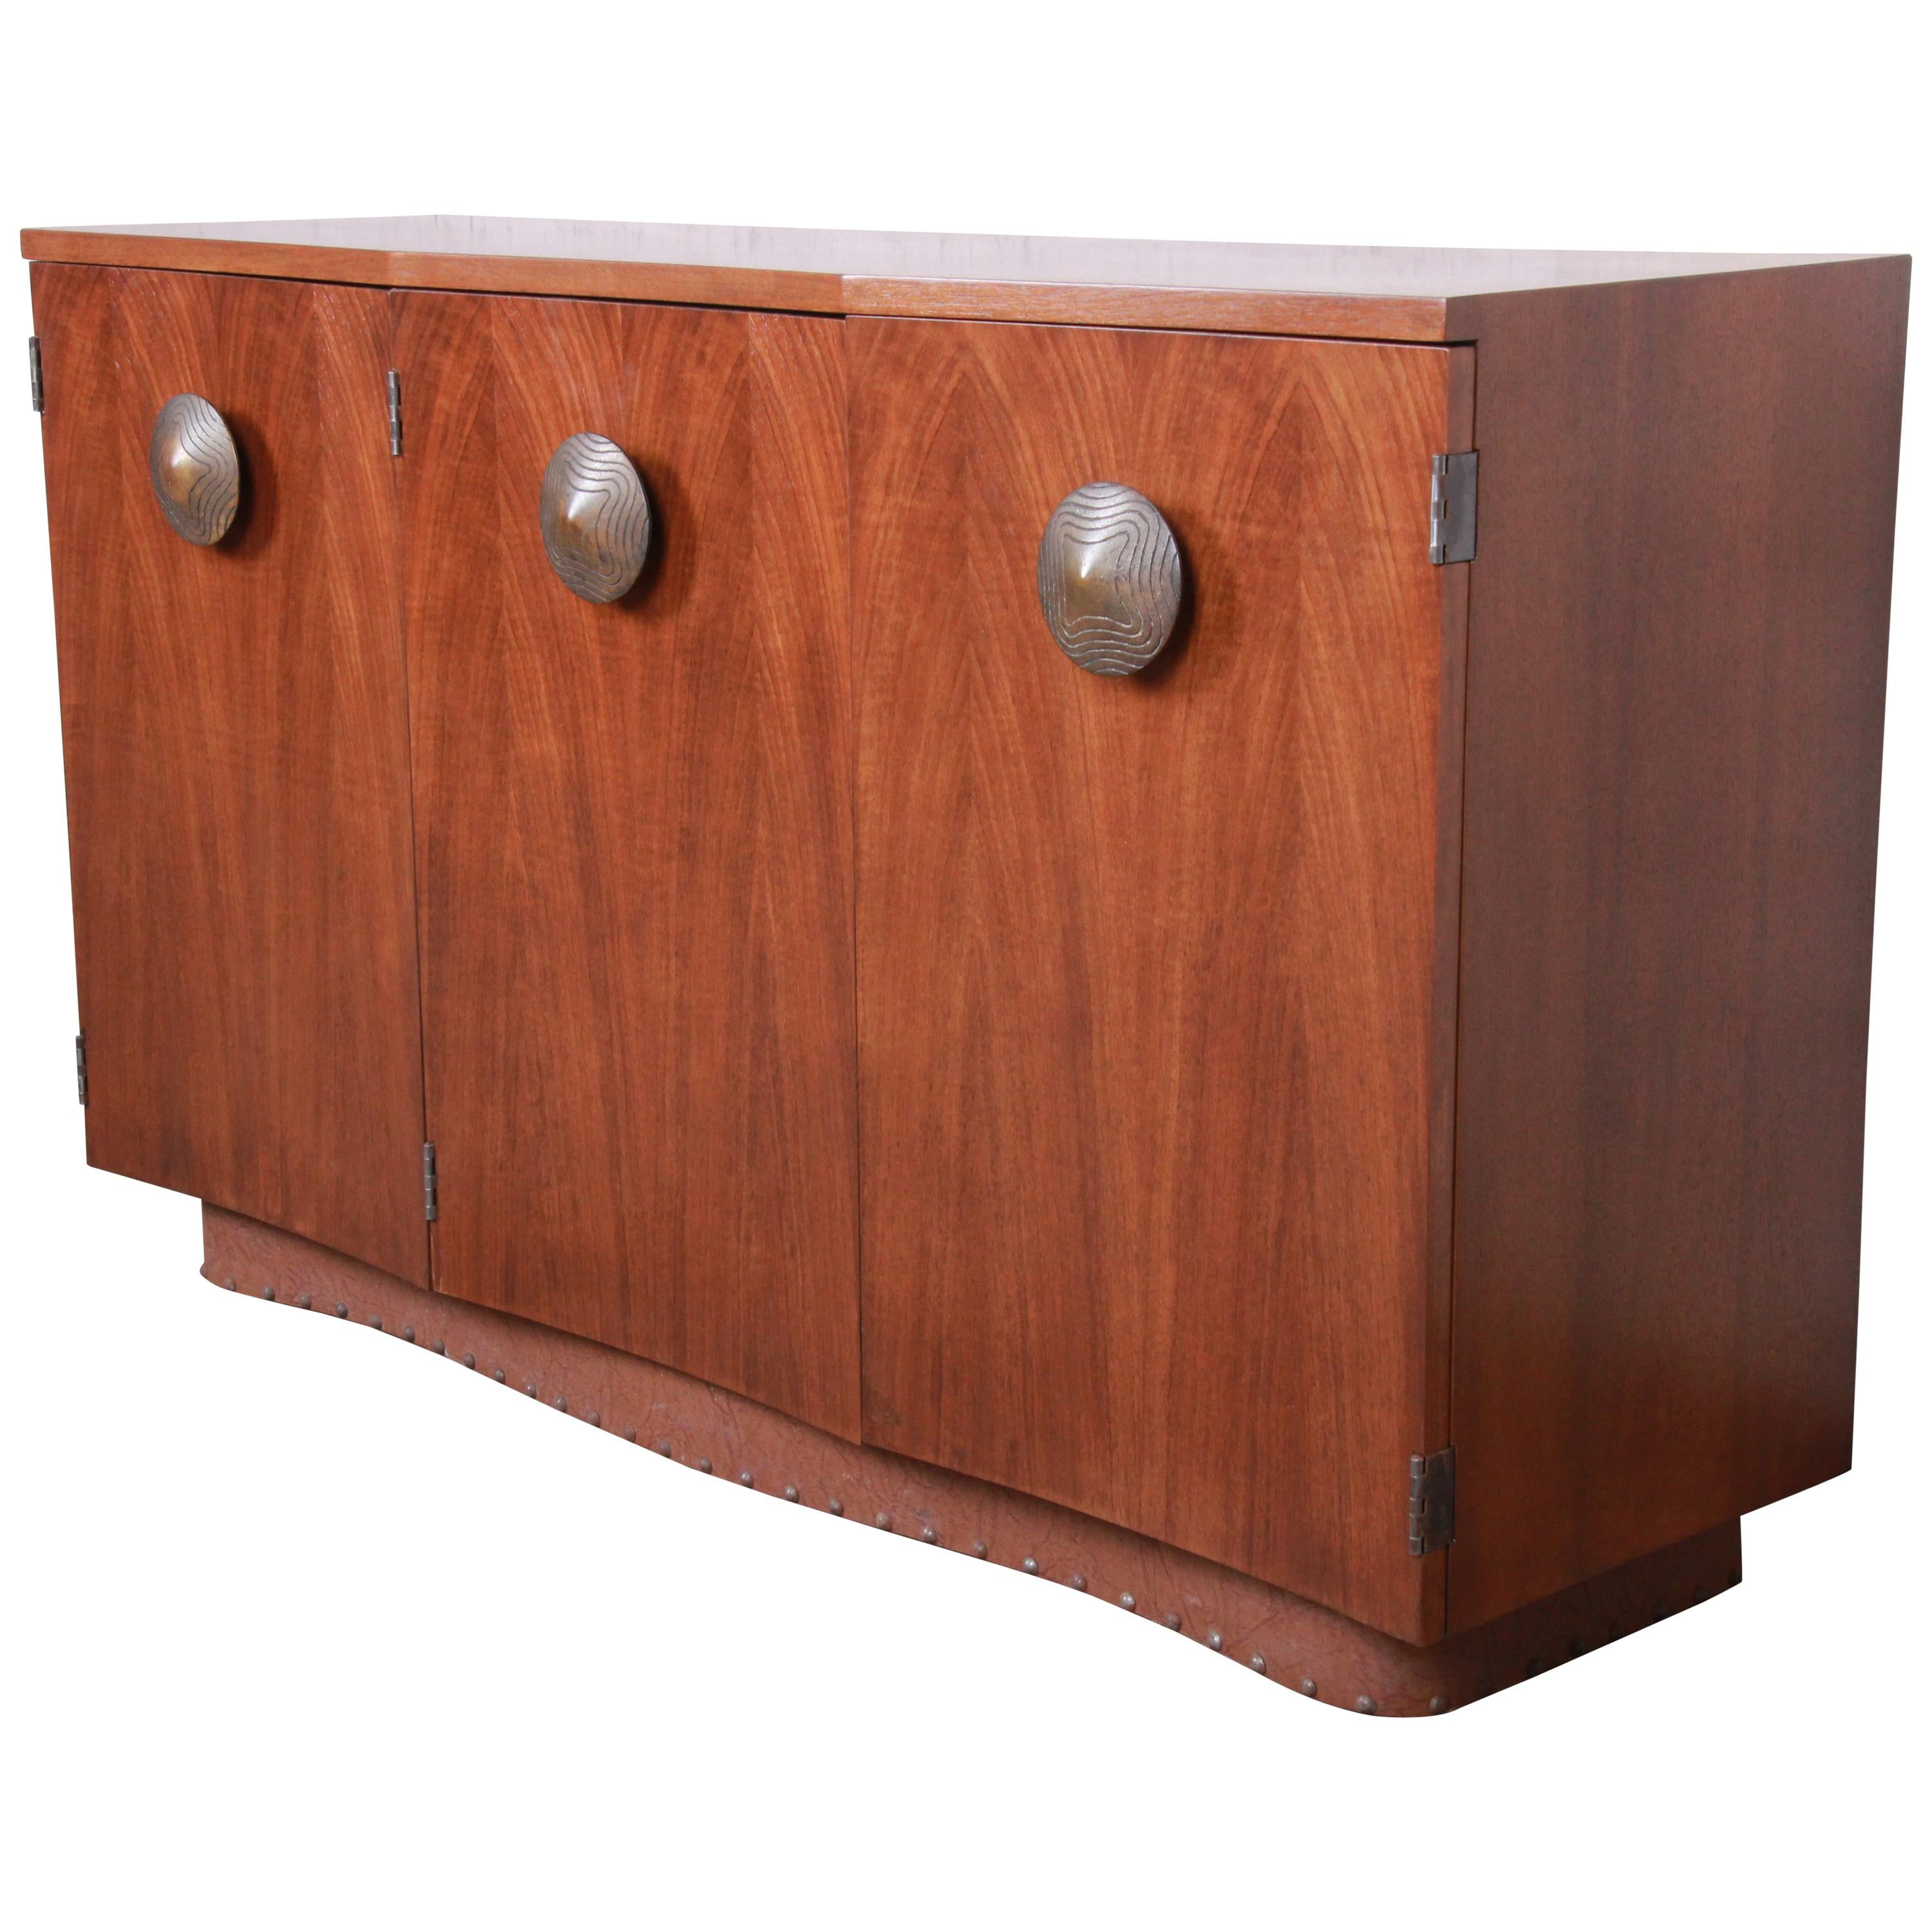 Gilbert Rohde for Herman Miller Paldao Sideboard or Bar Cabinet, Newly Restored